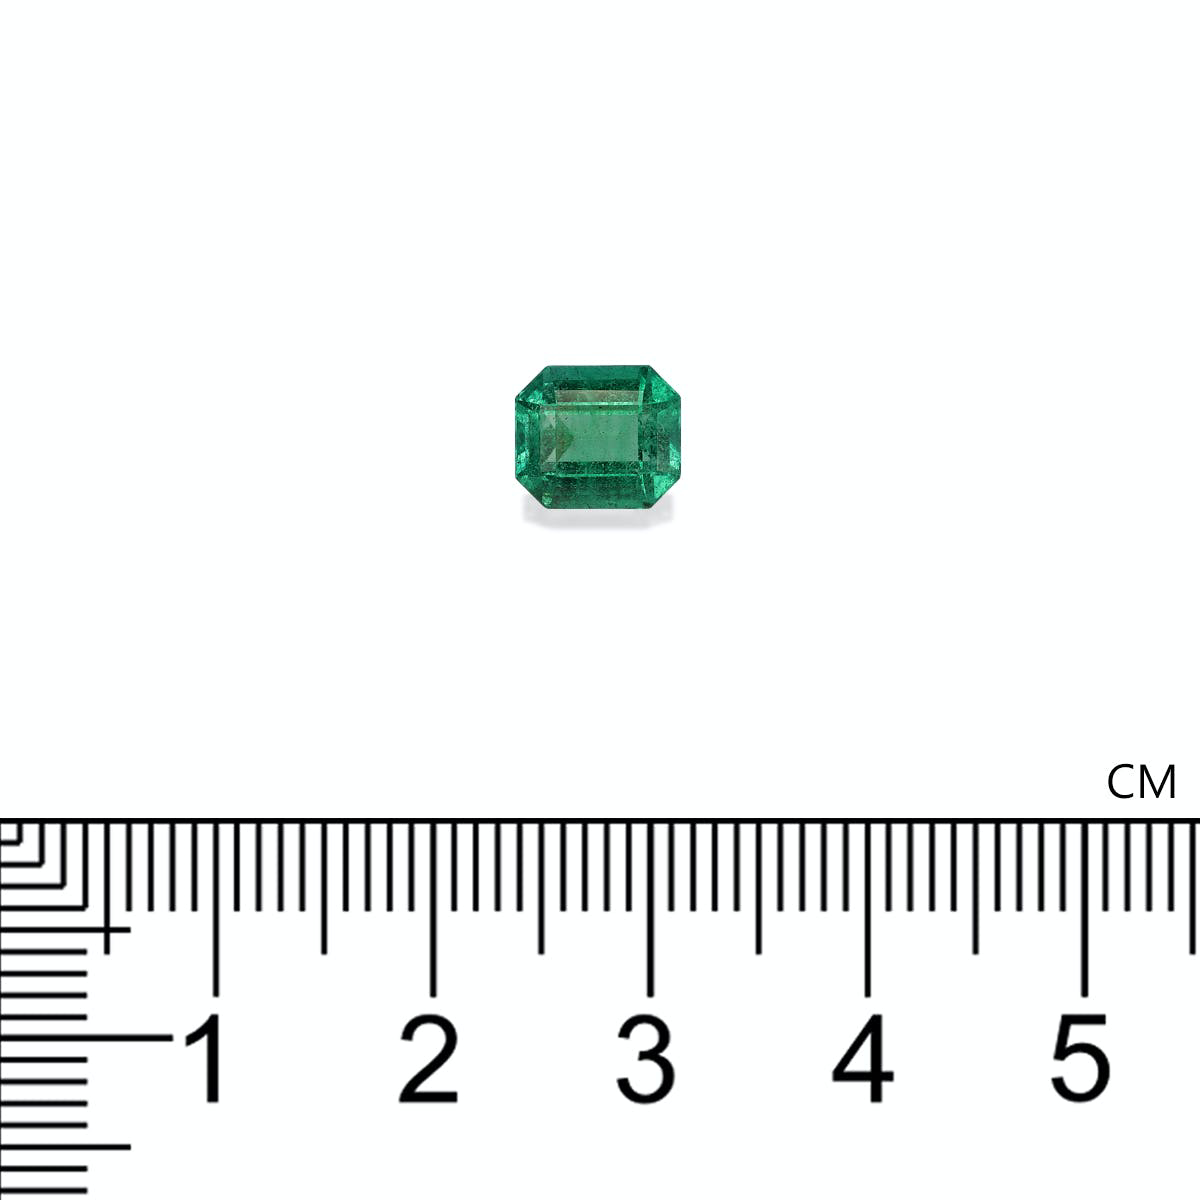 Picture of Green Zambian Emerald 1.76ct (PG0344)